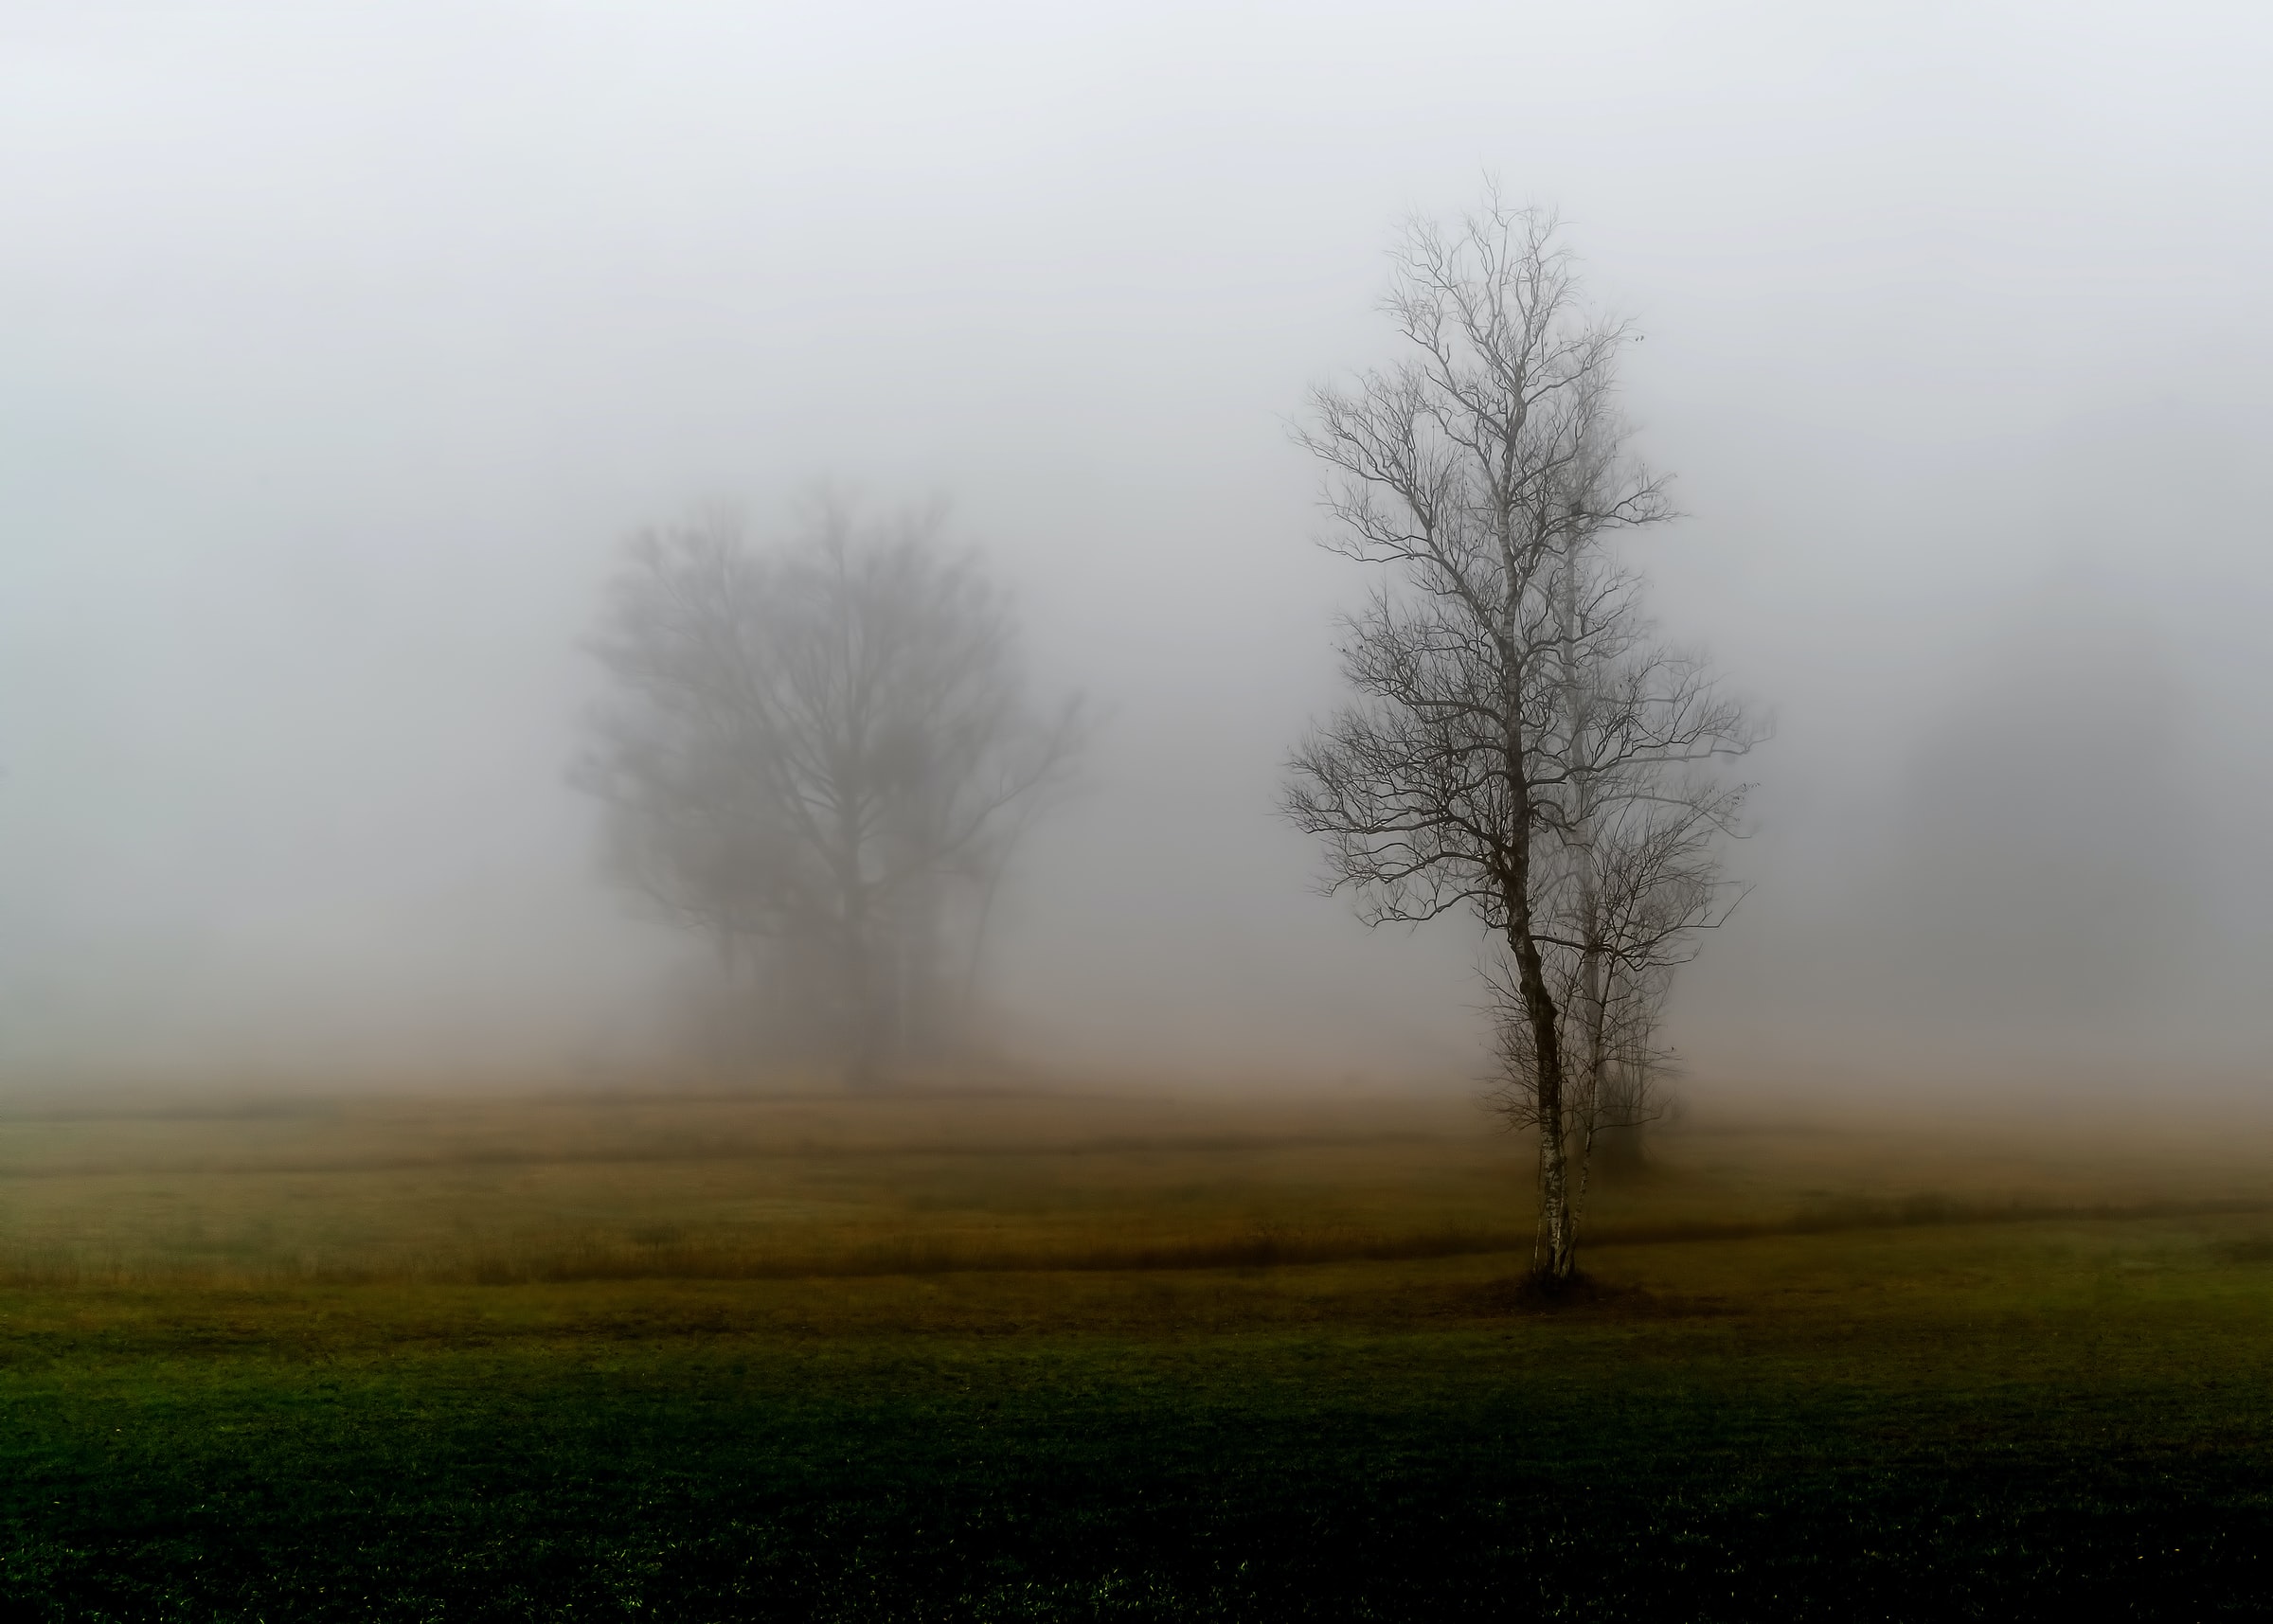 A foggy landscape with few scattered trees barely visible